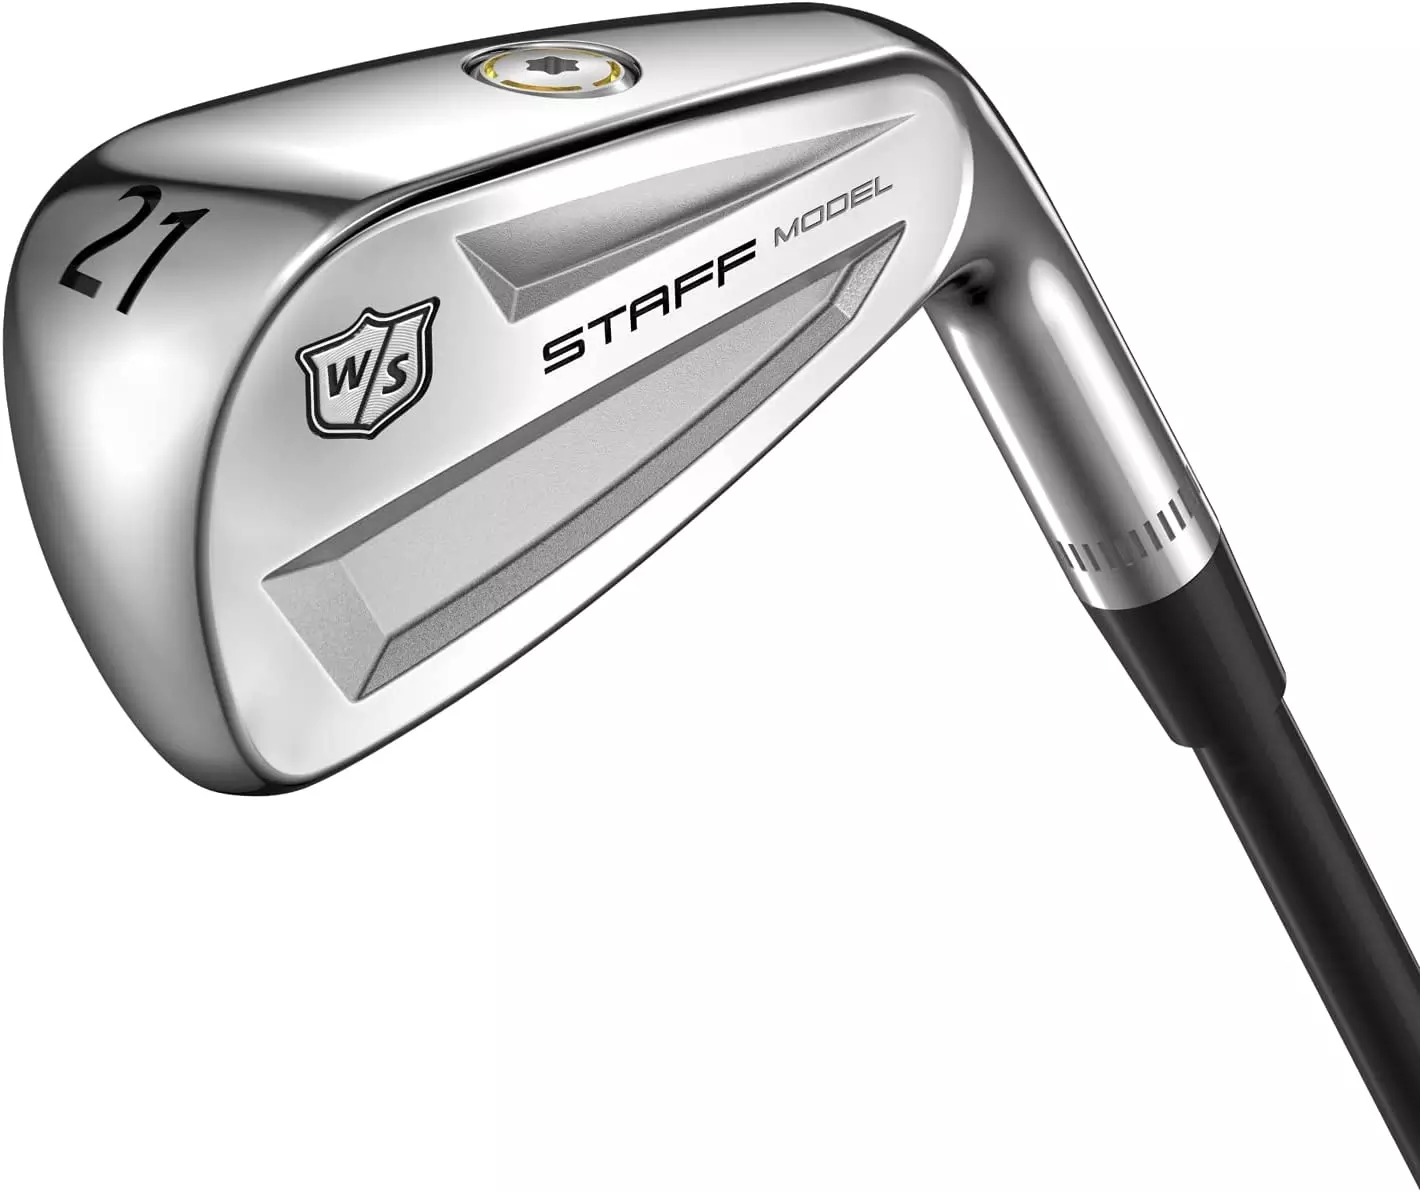 The WILSON Staff Model Utility Golf Club has become a top competitor in today's golf market based on it's simple, yet incredibly forgiving design. 